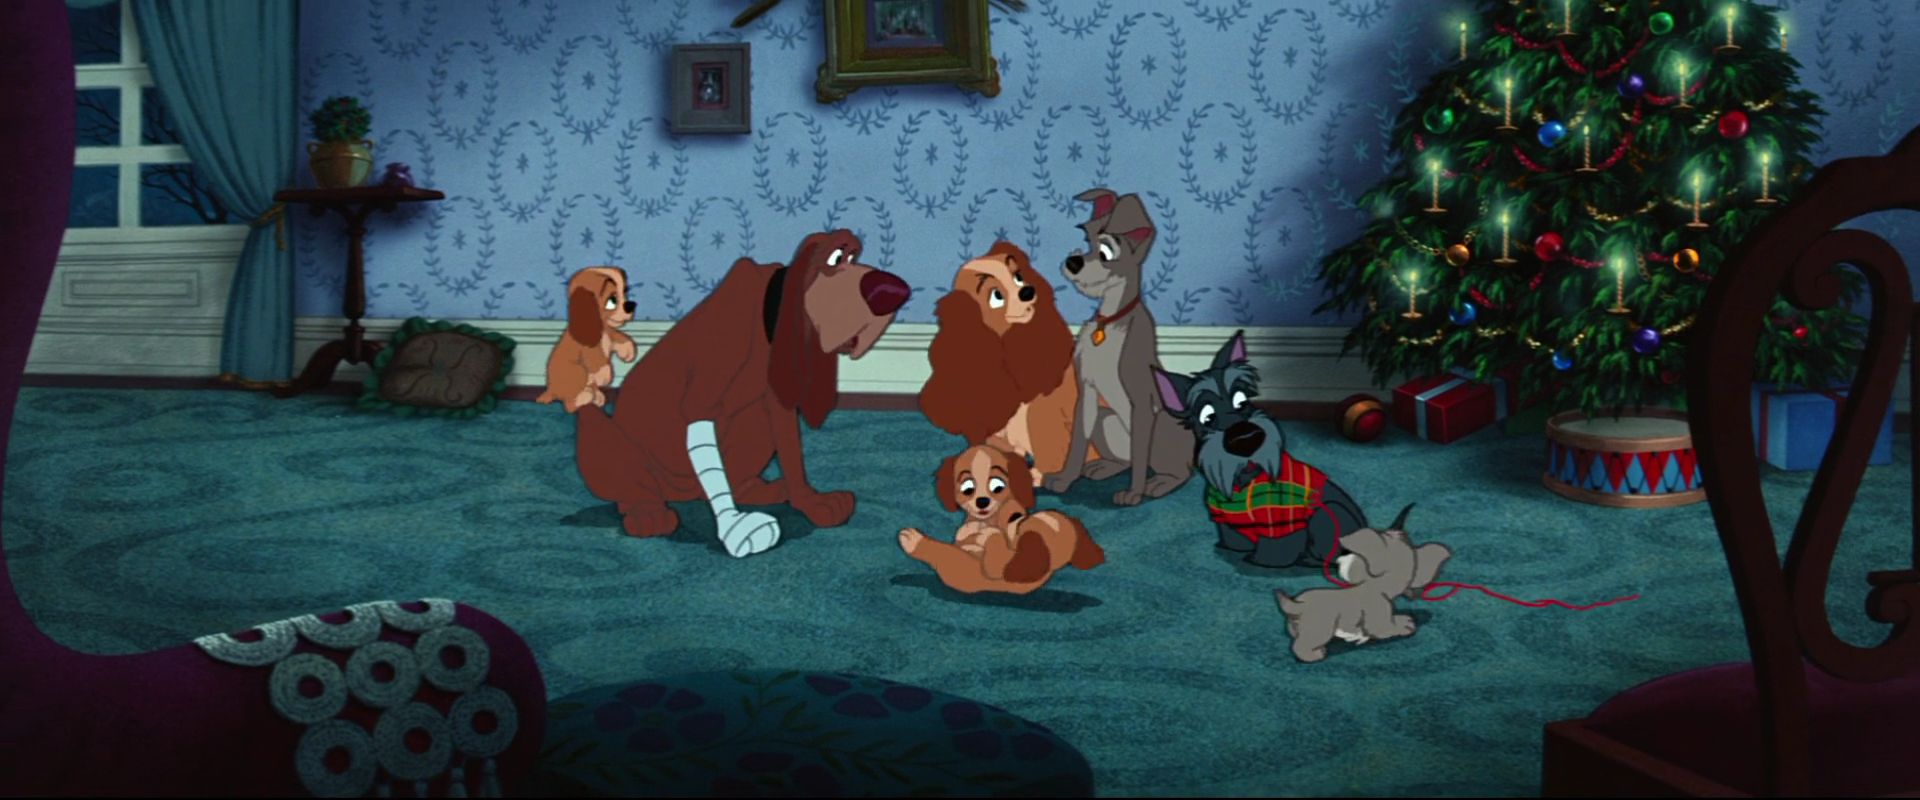 Lady and the Tramp (1955) Review – Distinct Chatter